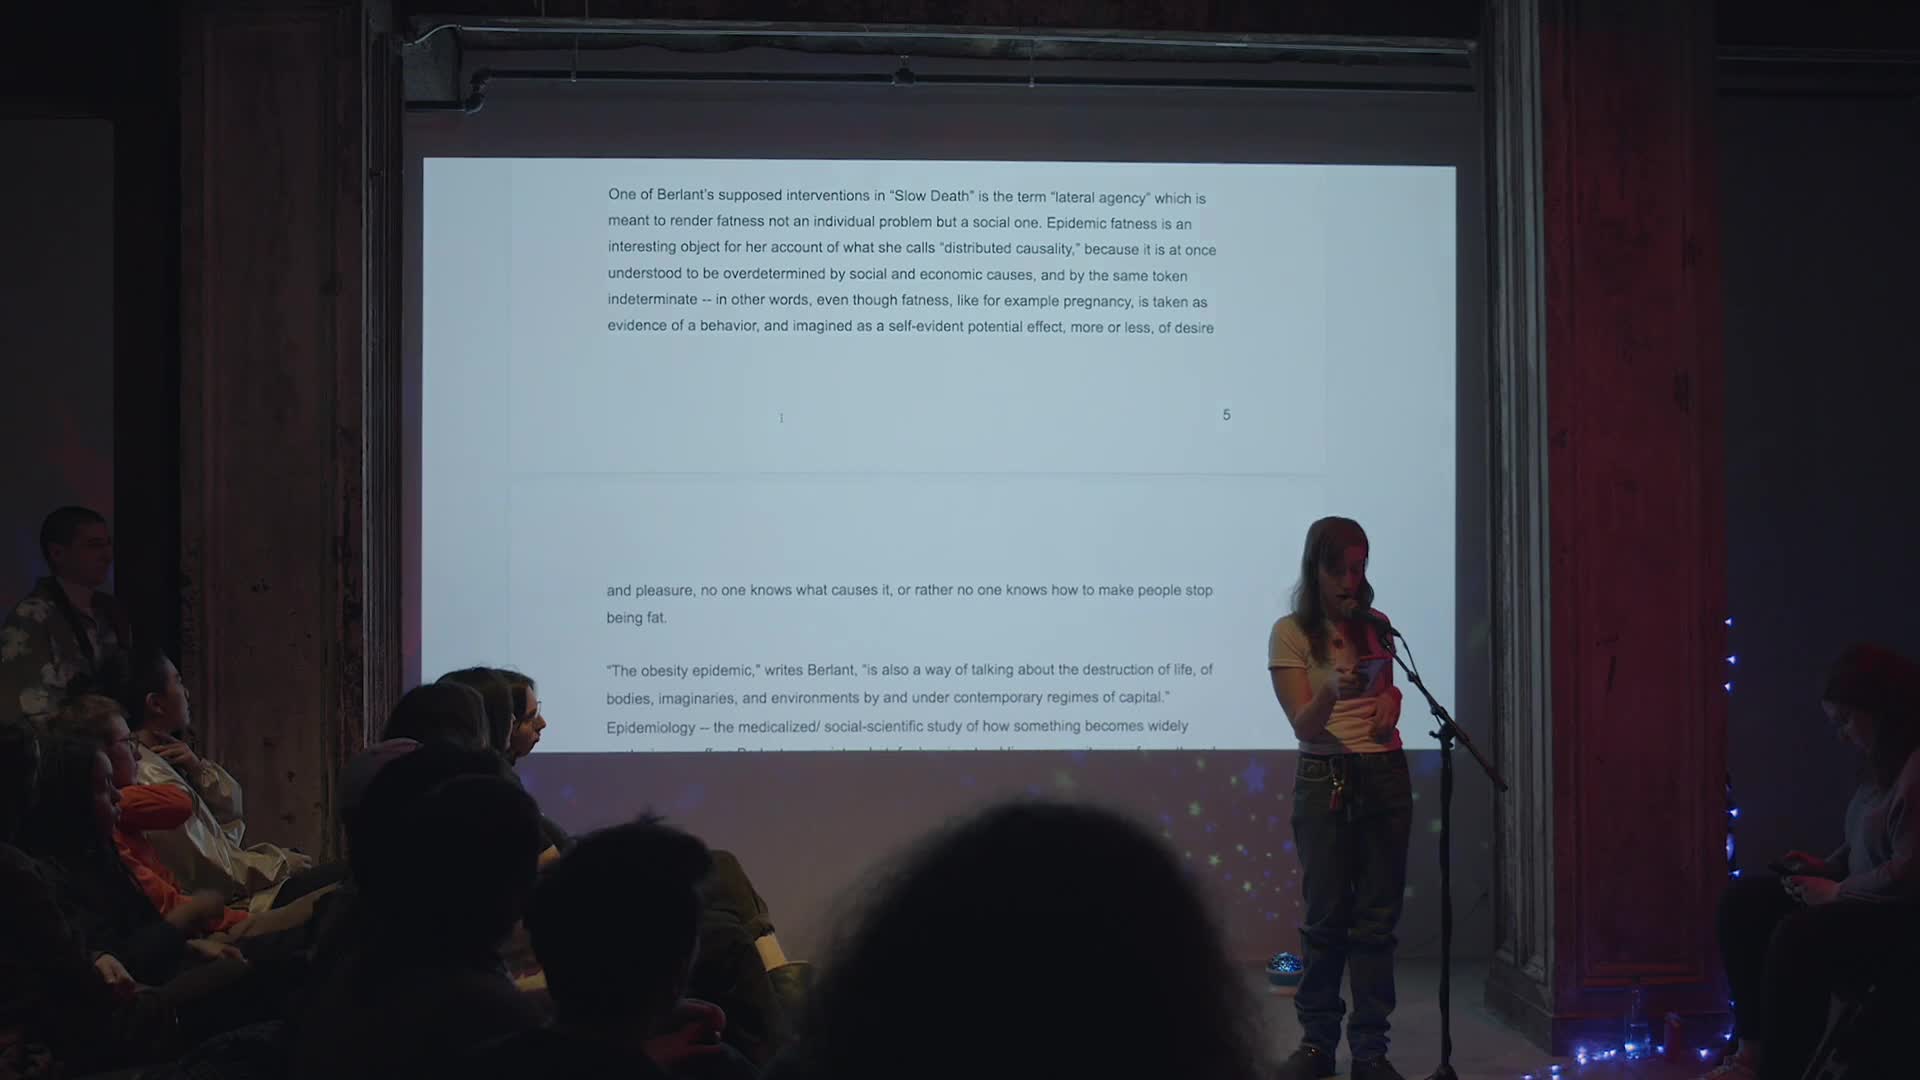 A person in a t-shirt and jeans stands at a microphone in front of a seated audience. She is reading off of her phone. There is a screen projected behind her that shows written text, videos, and photographs, changing in correspondence with what she is reading.